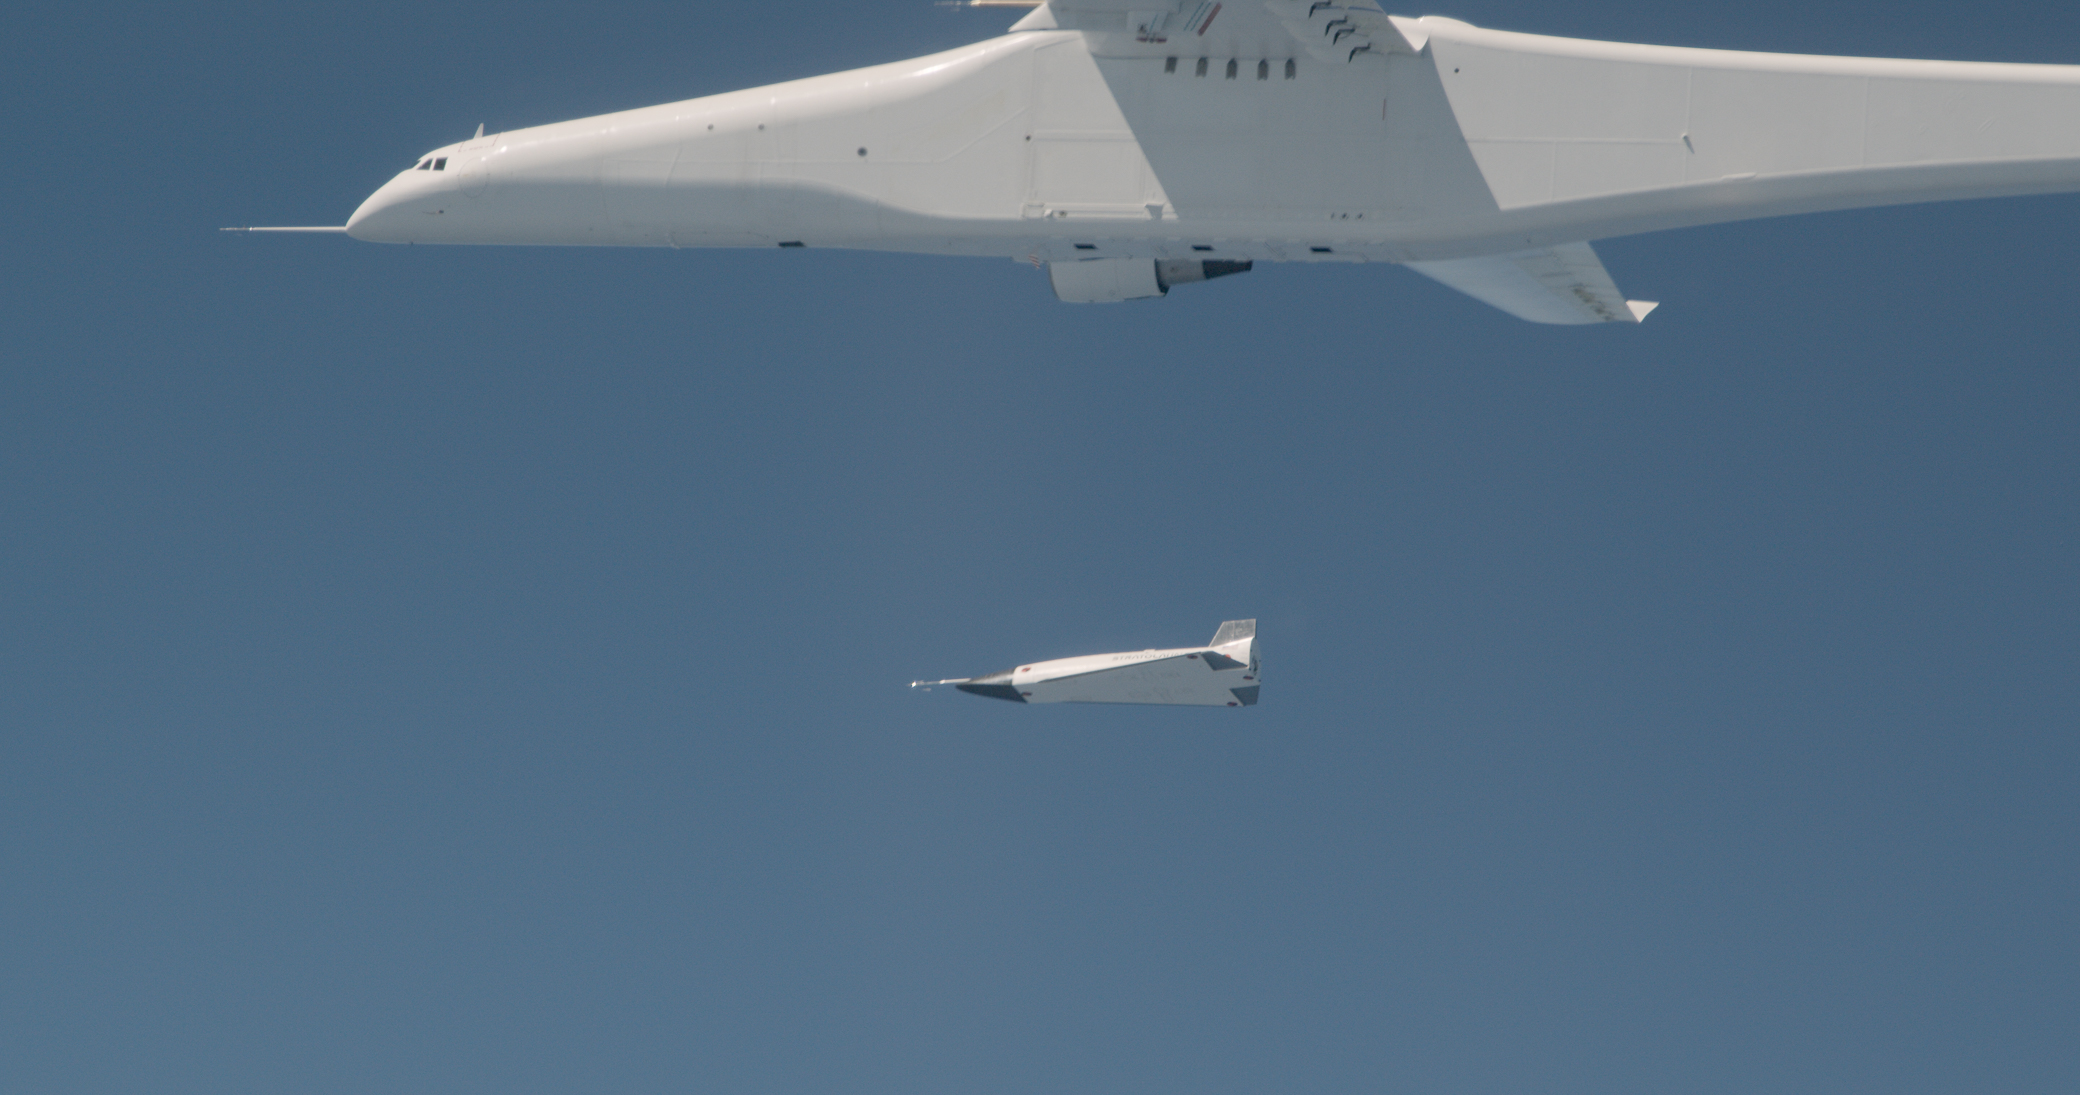 Stratolaunch Roc Aircraft Has Successfully Completed The Separation Test of Talon-A Vehicle.